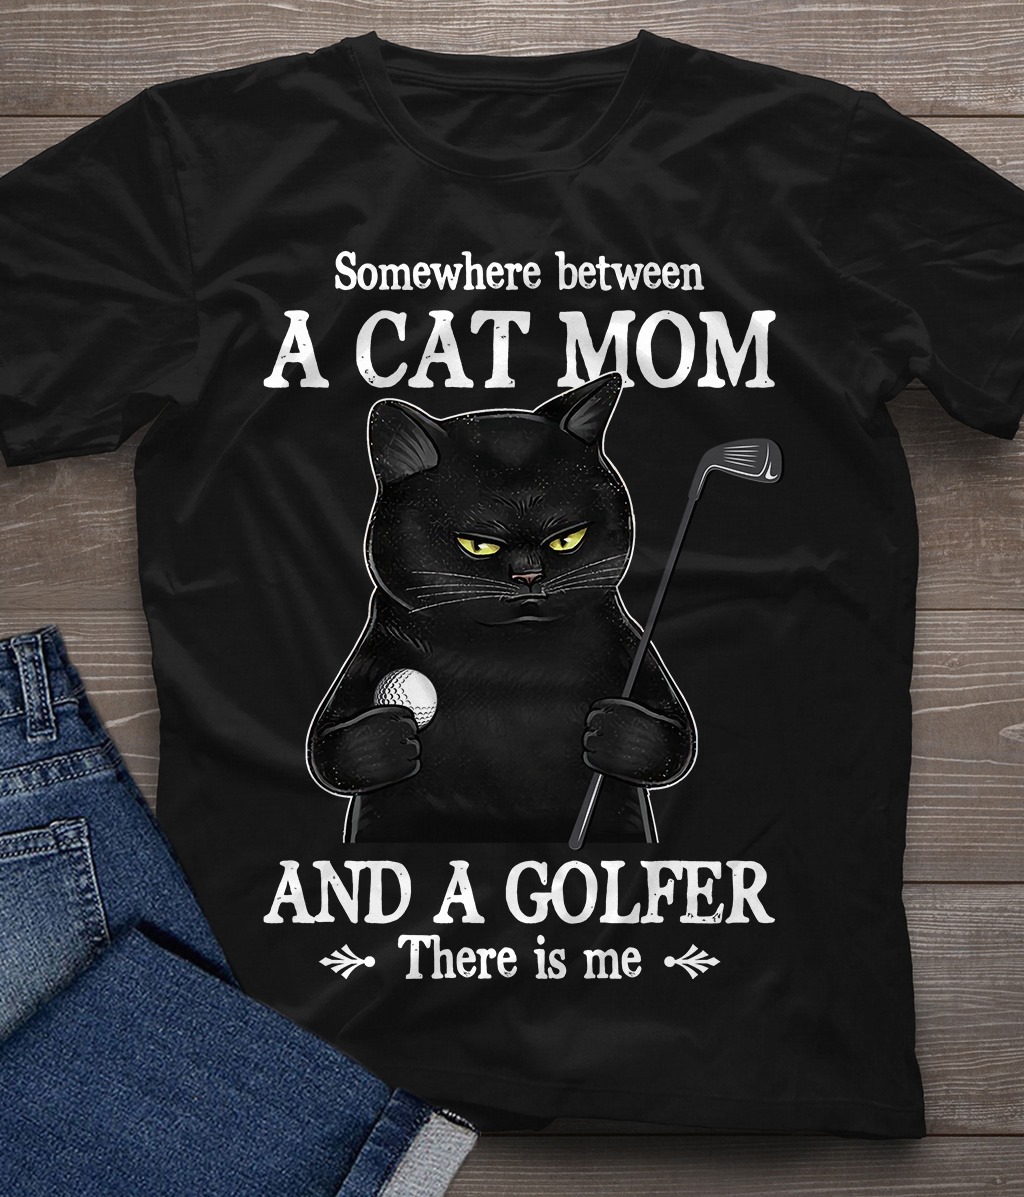 Somewhere between a cat mom and a golfer there is me - Cat mom, mother play golf